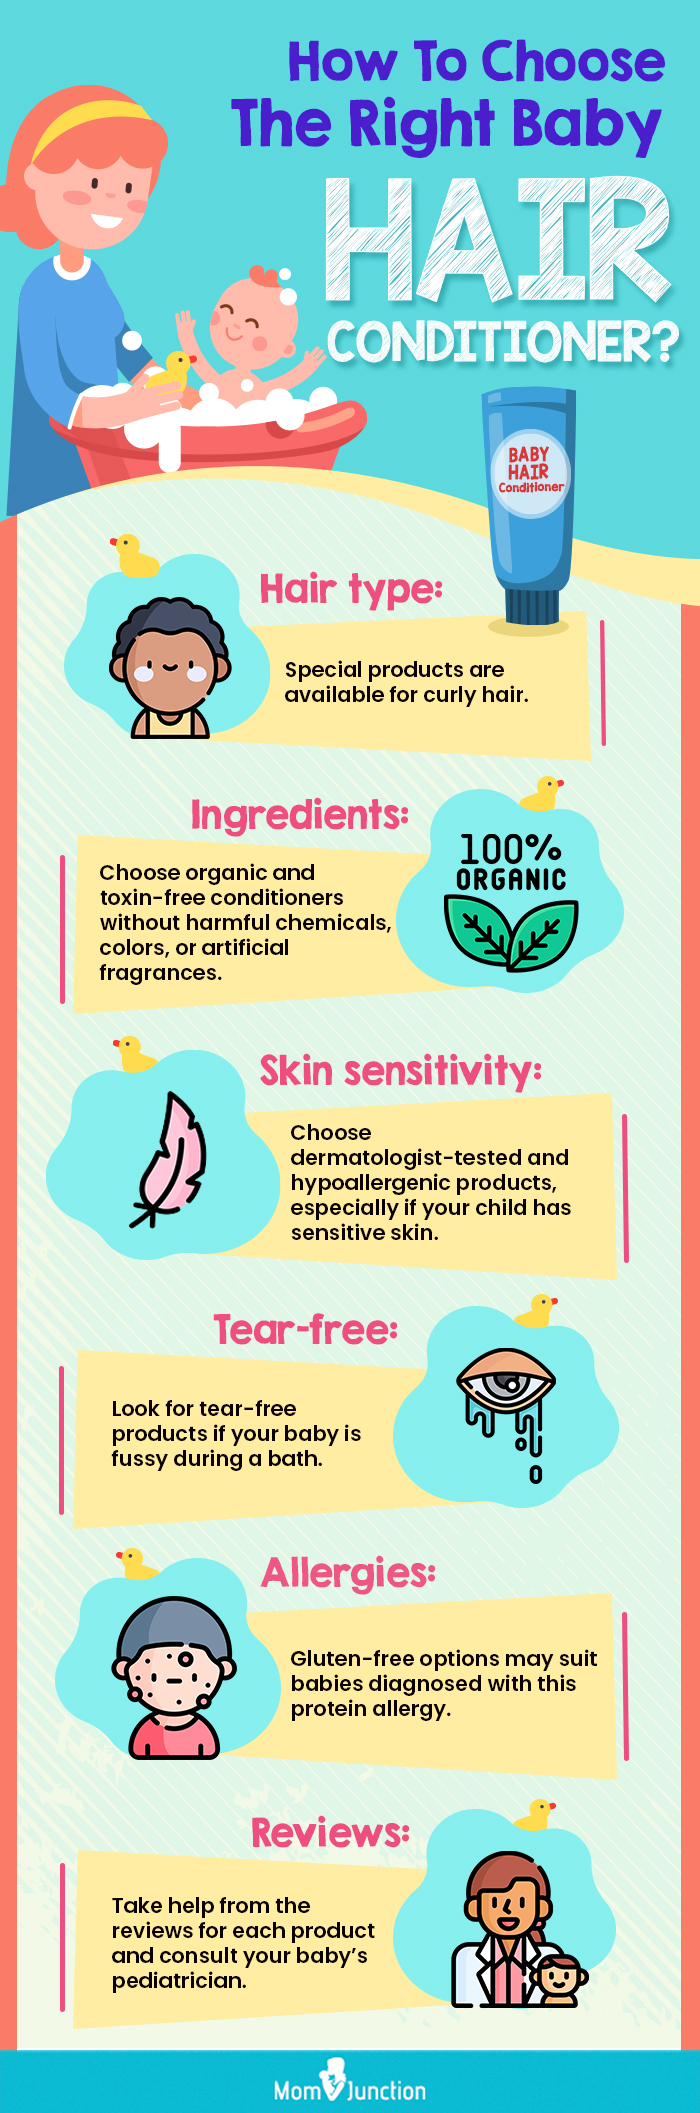 How To Choose The Right Baby Hair Conditioner (infographic)